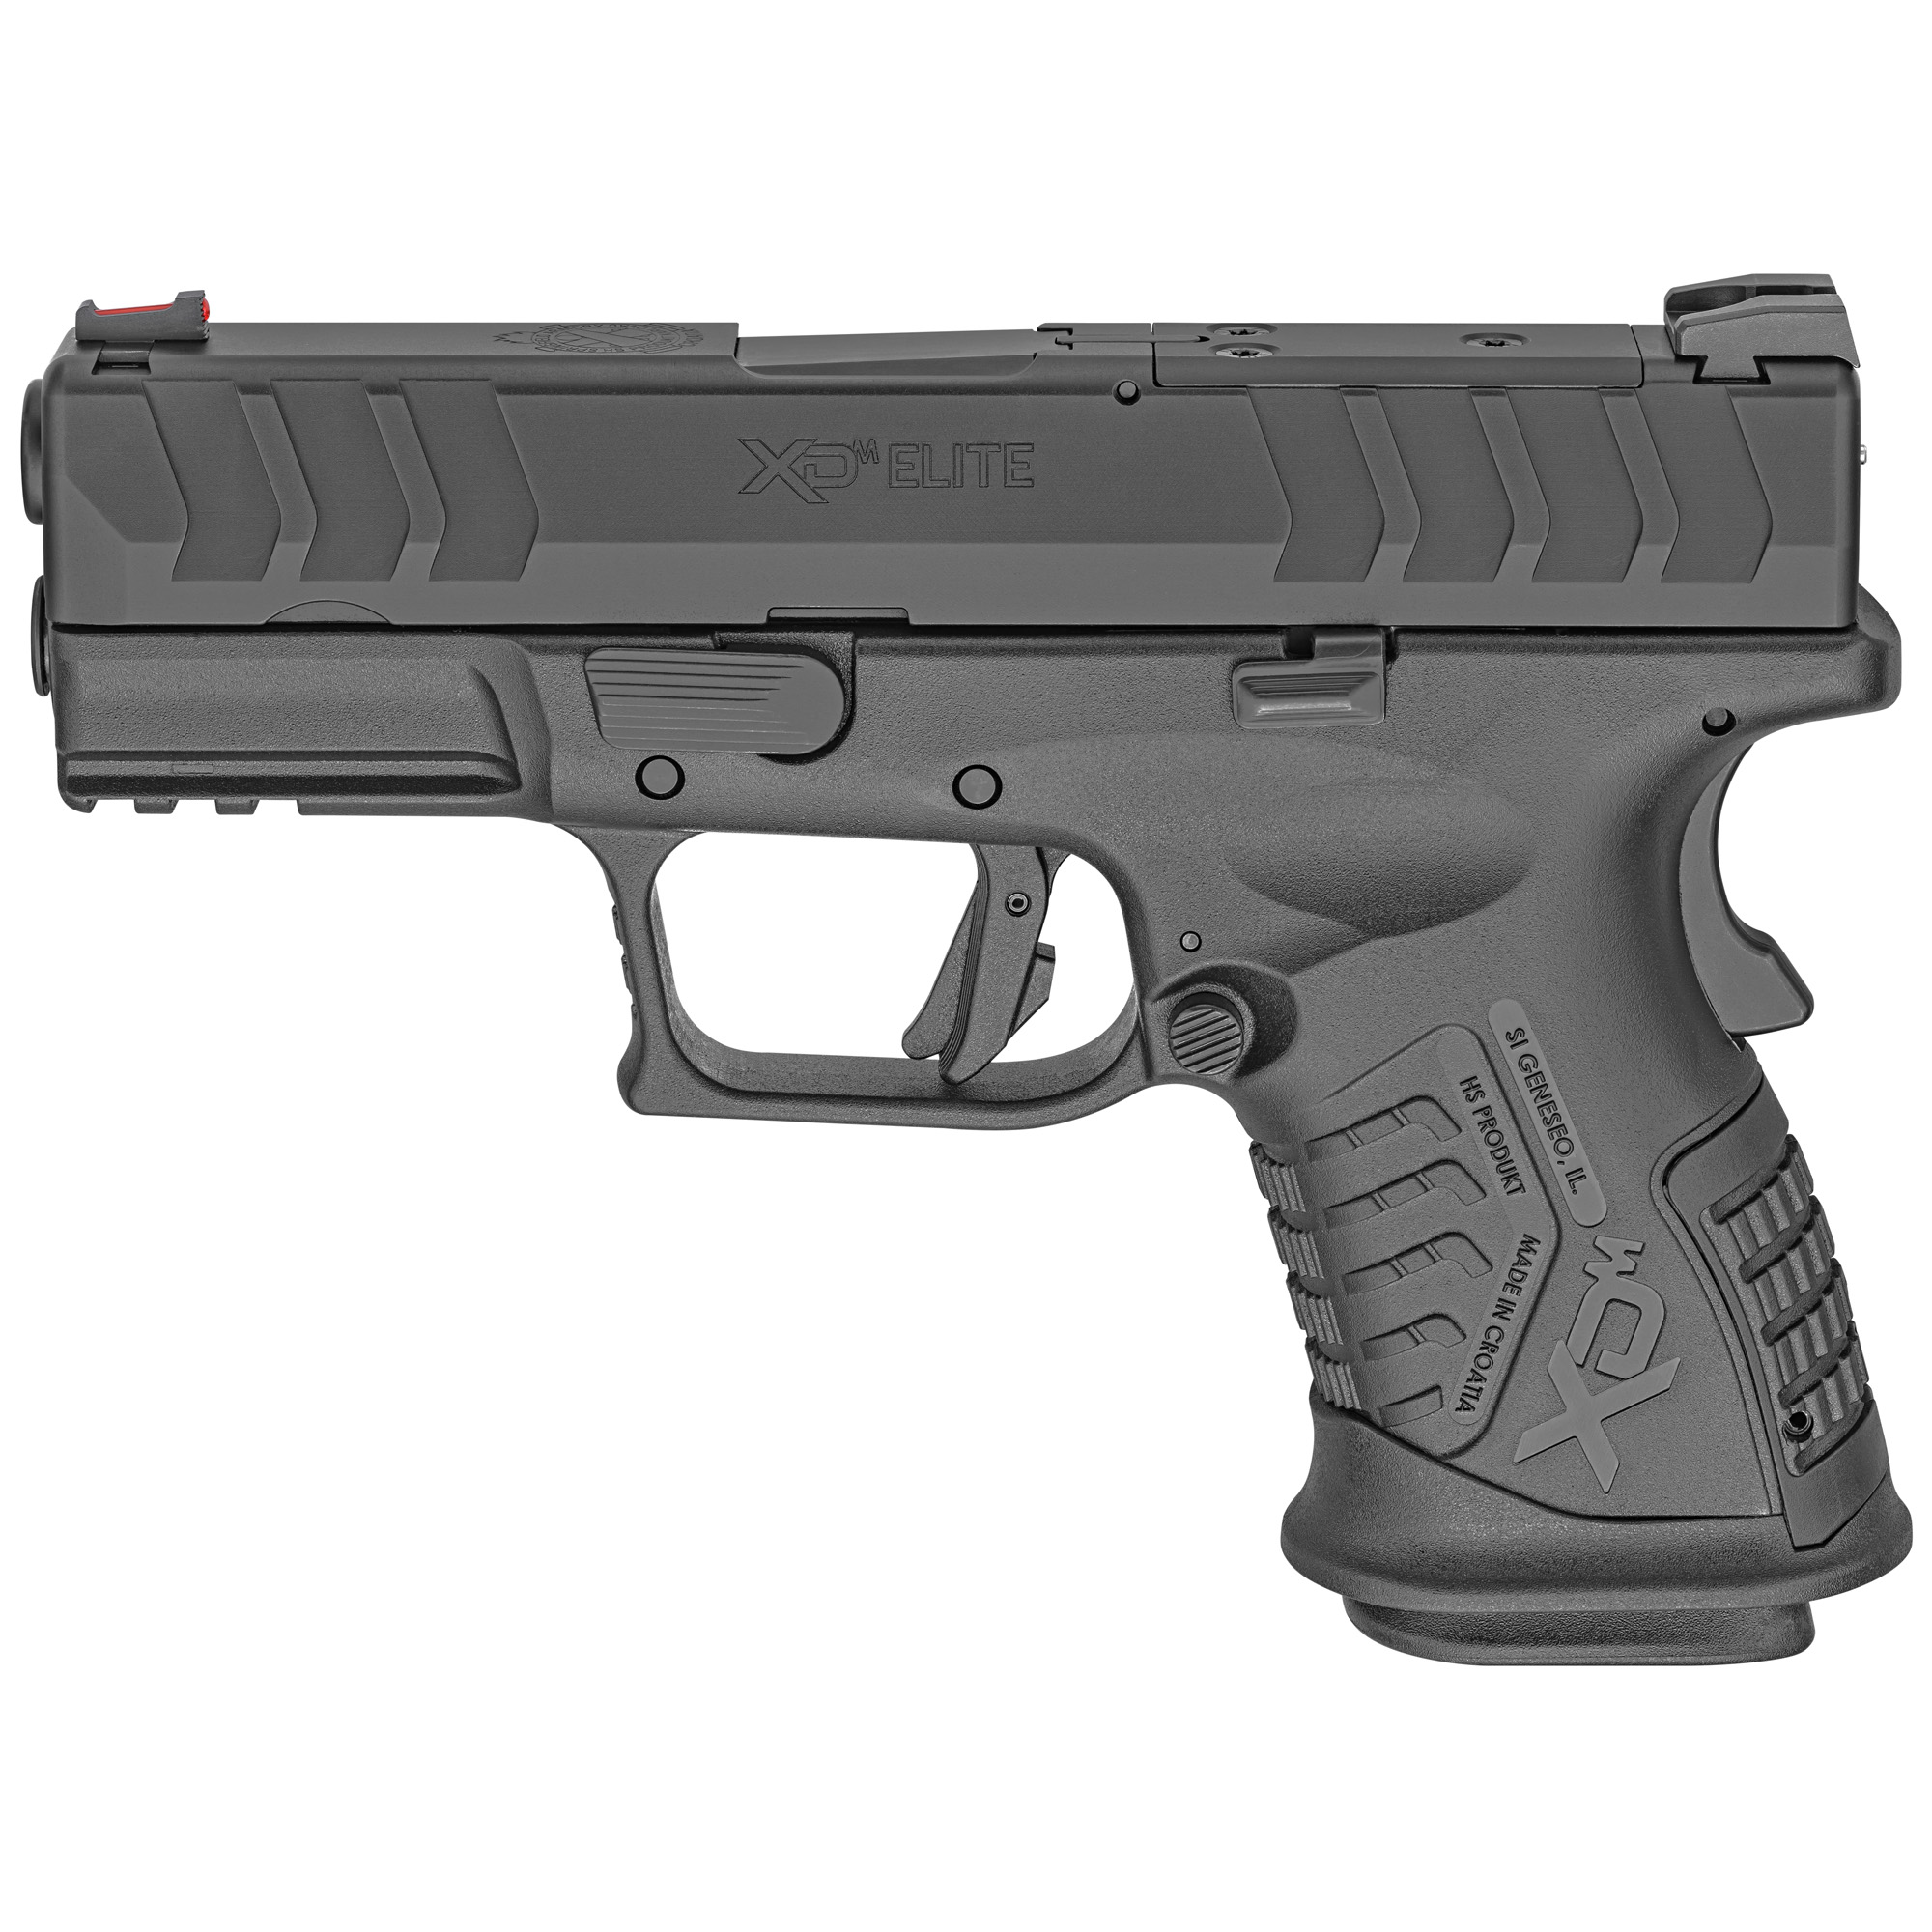 Springfield, XDM Elite Compact OSP (Optical Sight Pistol), Semi-automatic Pistol, Striker Fired, 9MM, 3.8" Hammer Forged Steel Barrel, Black, Melonite Finish, Polymer Frame, 14 Rounds, 2 Magazines